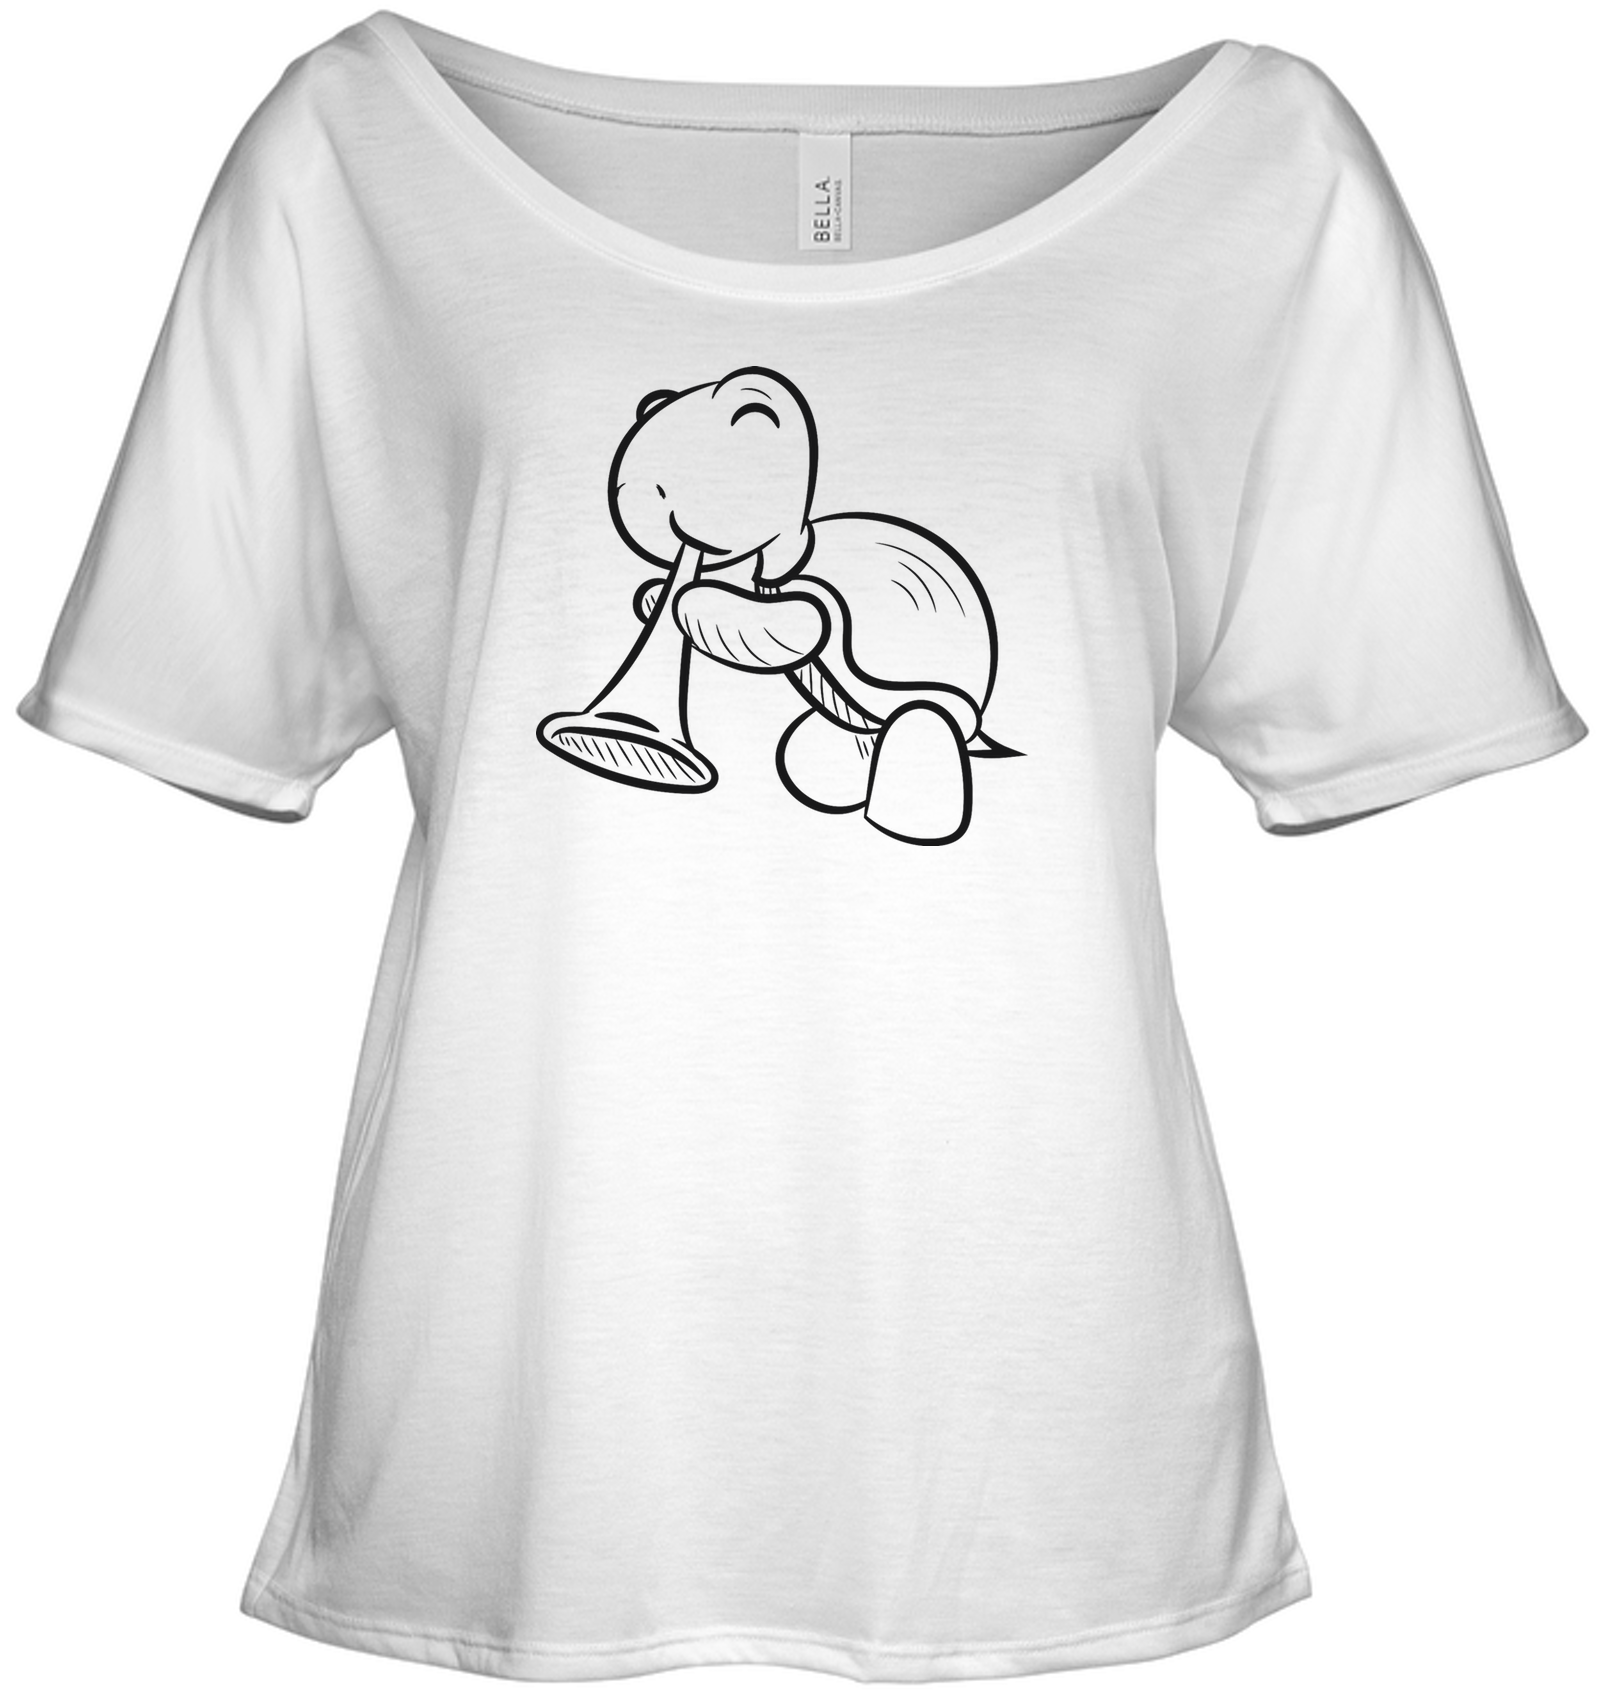 Turtle with Trumpet - Bella + Canvas Women's Slouchy Tee